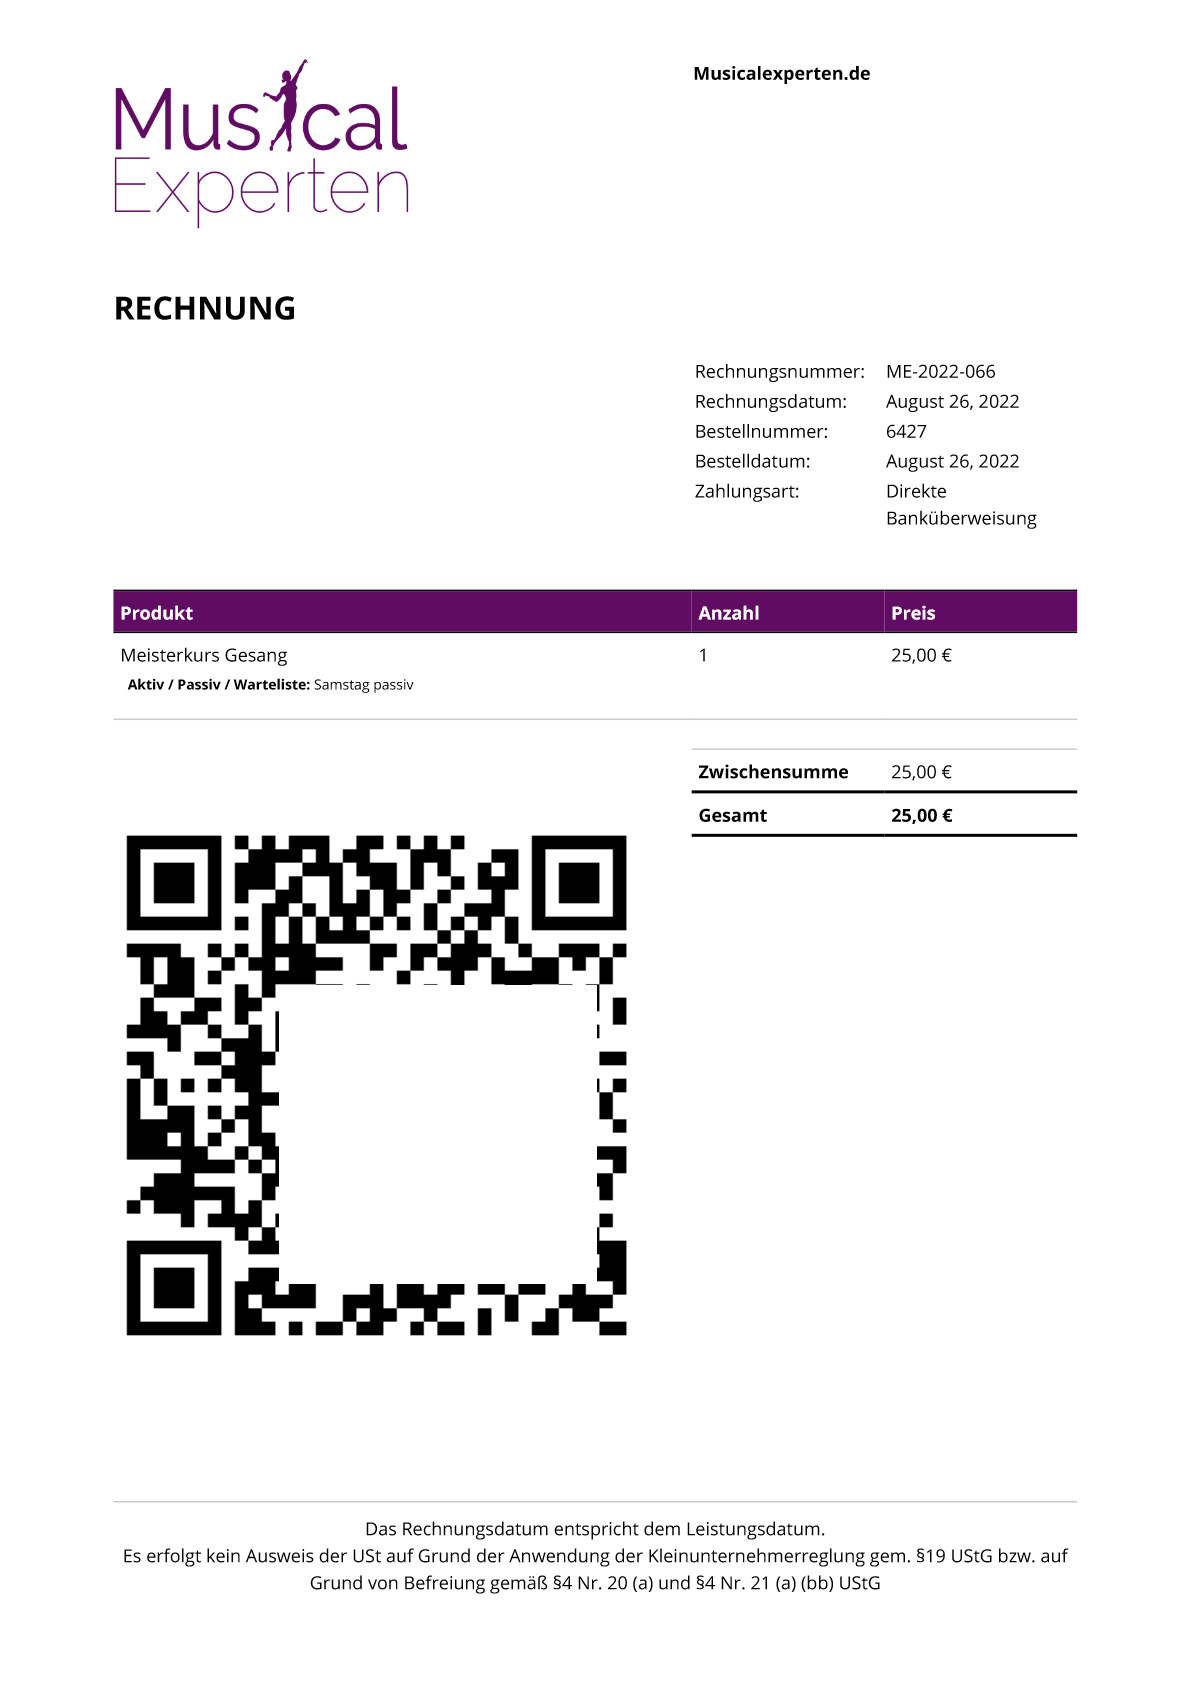 example how the qr-code is hooked into a pdf envoice